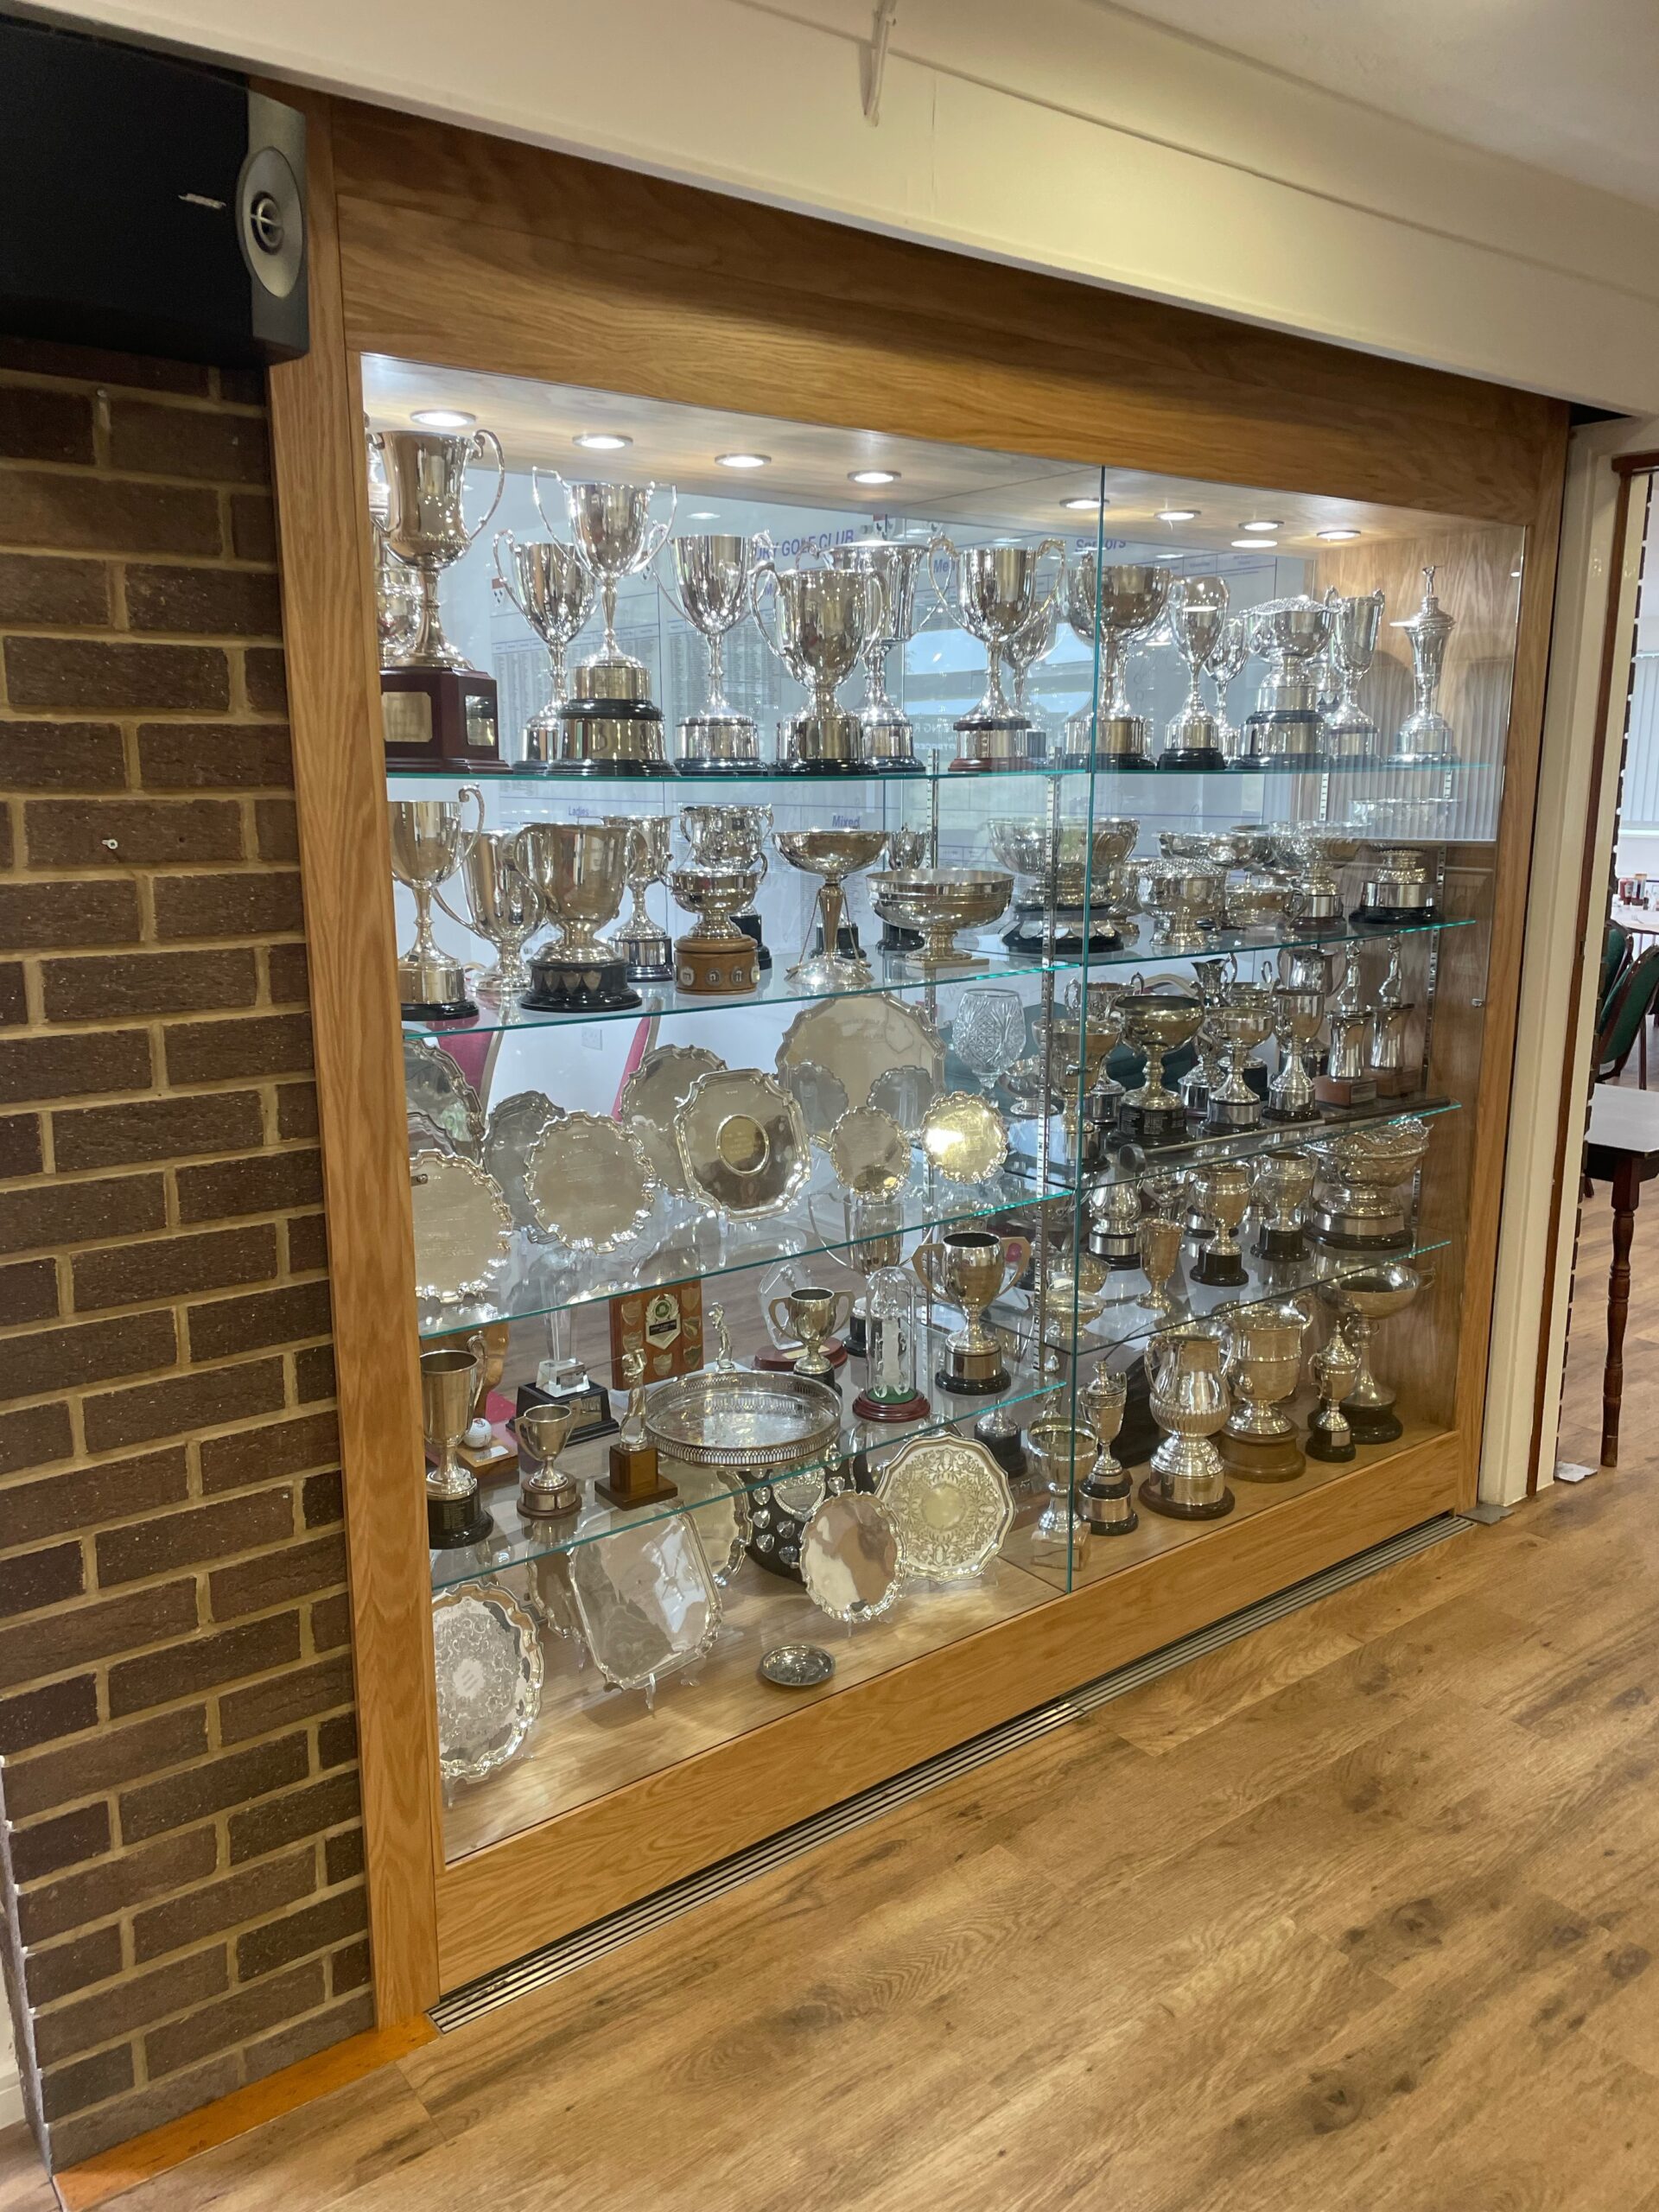 Standard Awards Cabinets for School